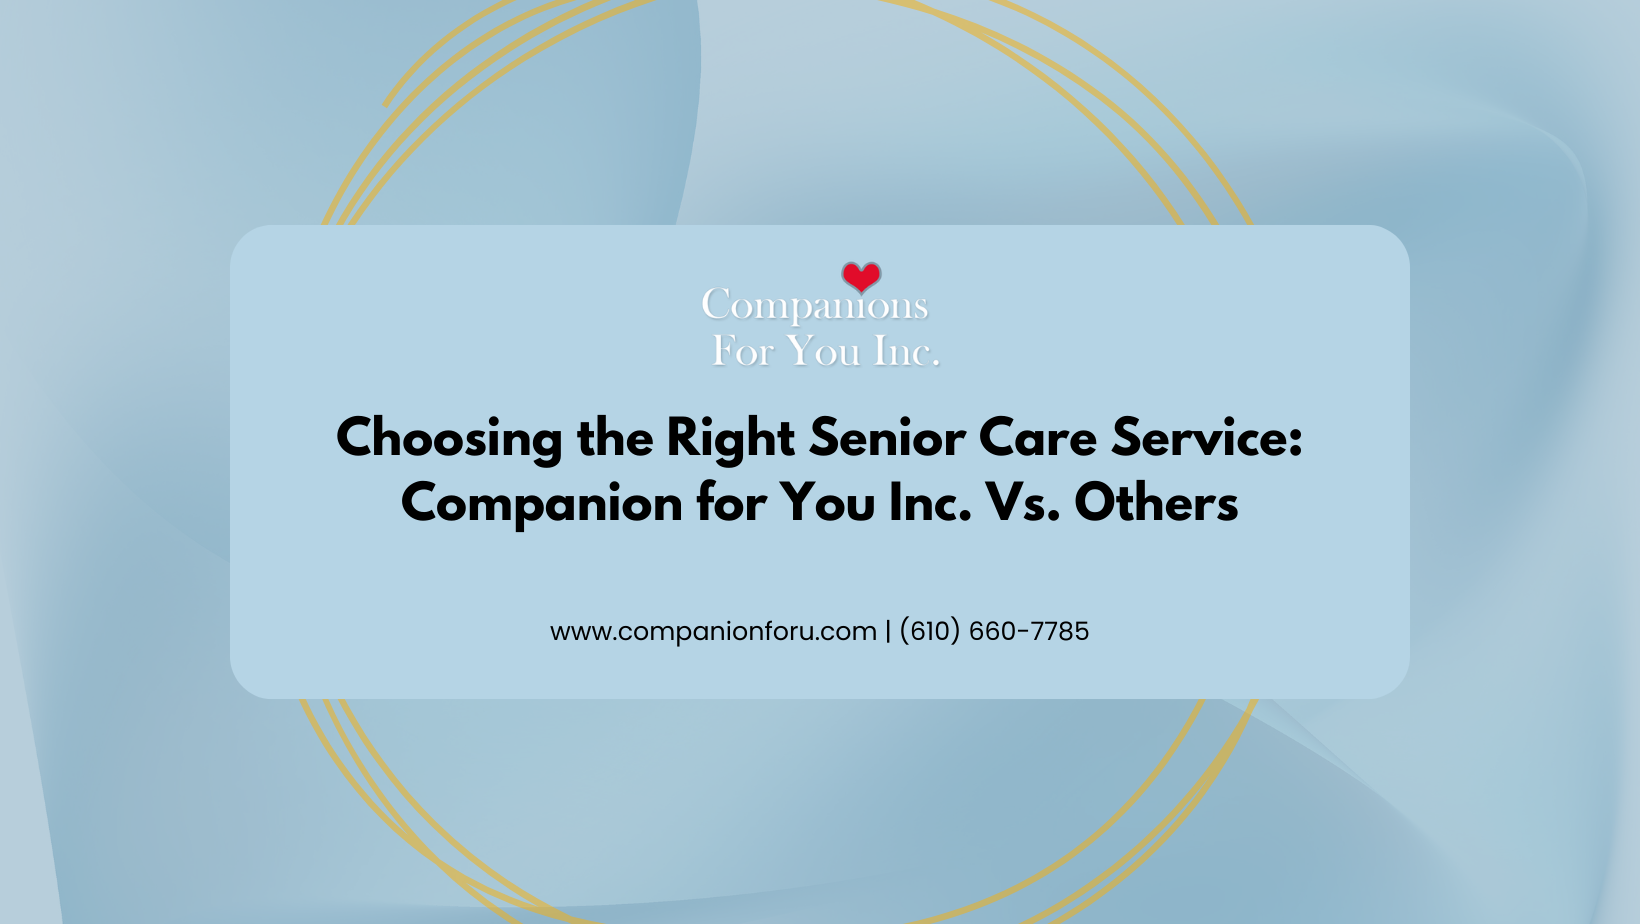 Choosing the Right Senior Care Service: Companion for You Inc. Vs. Others